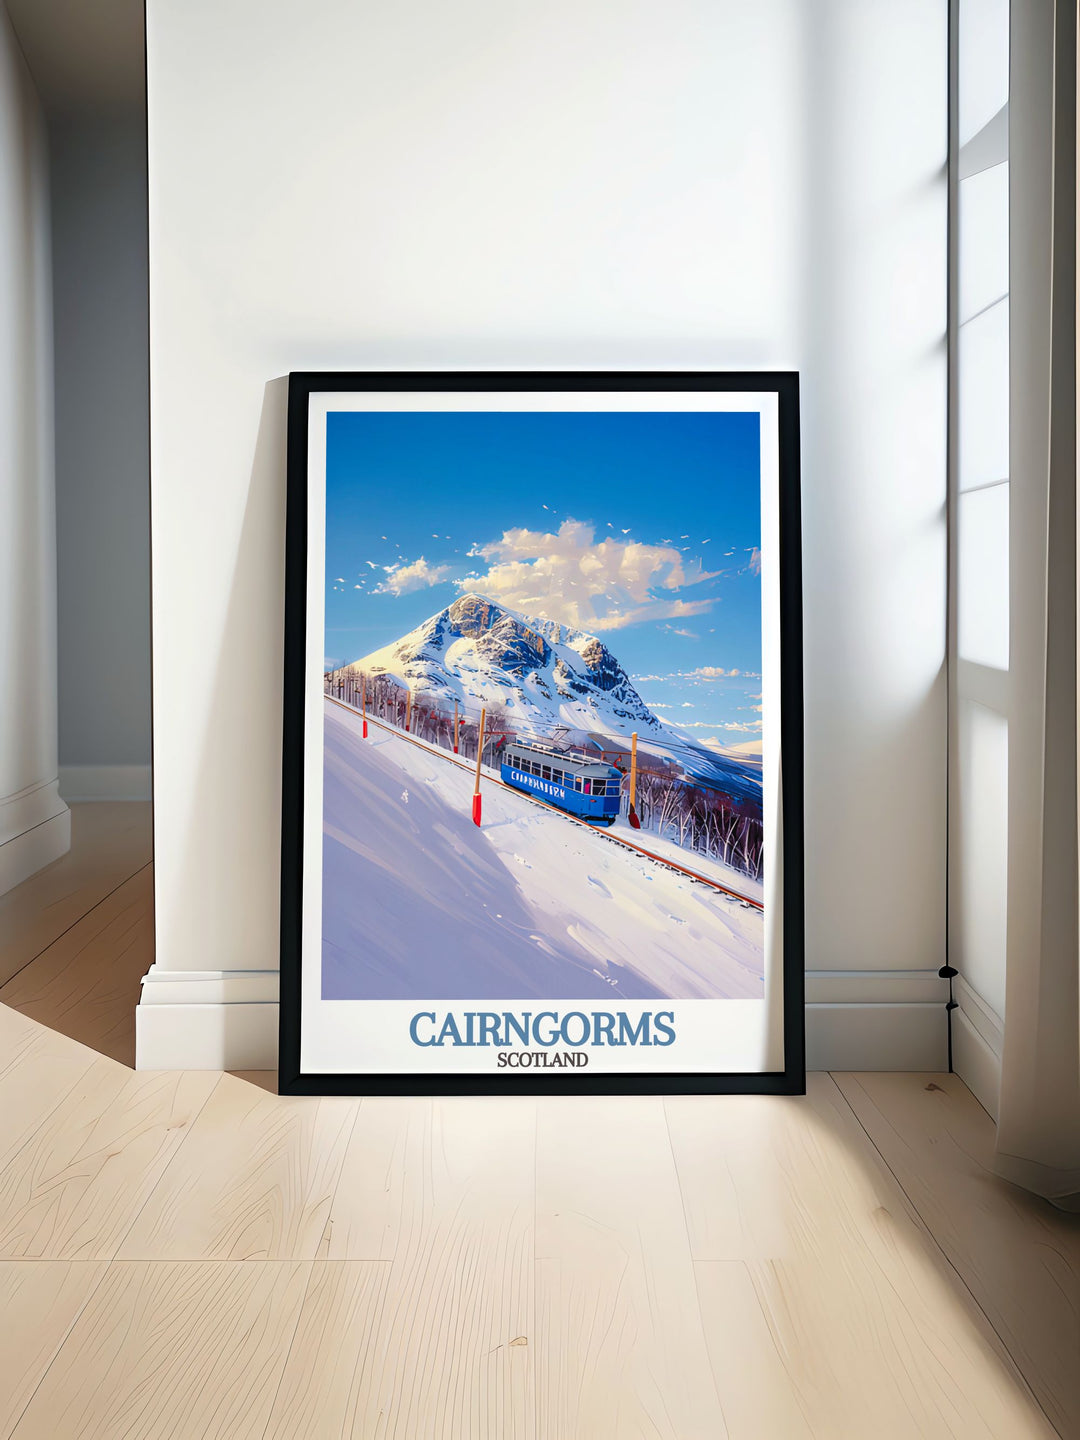 Cairngorm Mountain travel poster showcasing the breathtaking landscapes of the Cairngorms in Scotland perfect for adding a touch of nature to your home or office decor vibrant colors and intricate details make this a standout piece in any collection of wall art and travel posters.